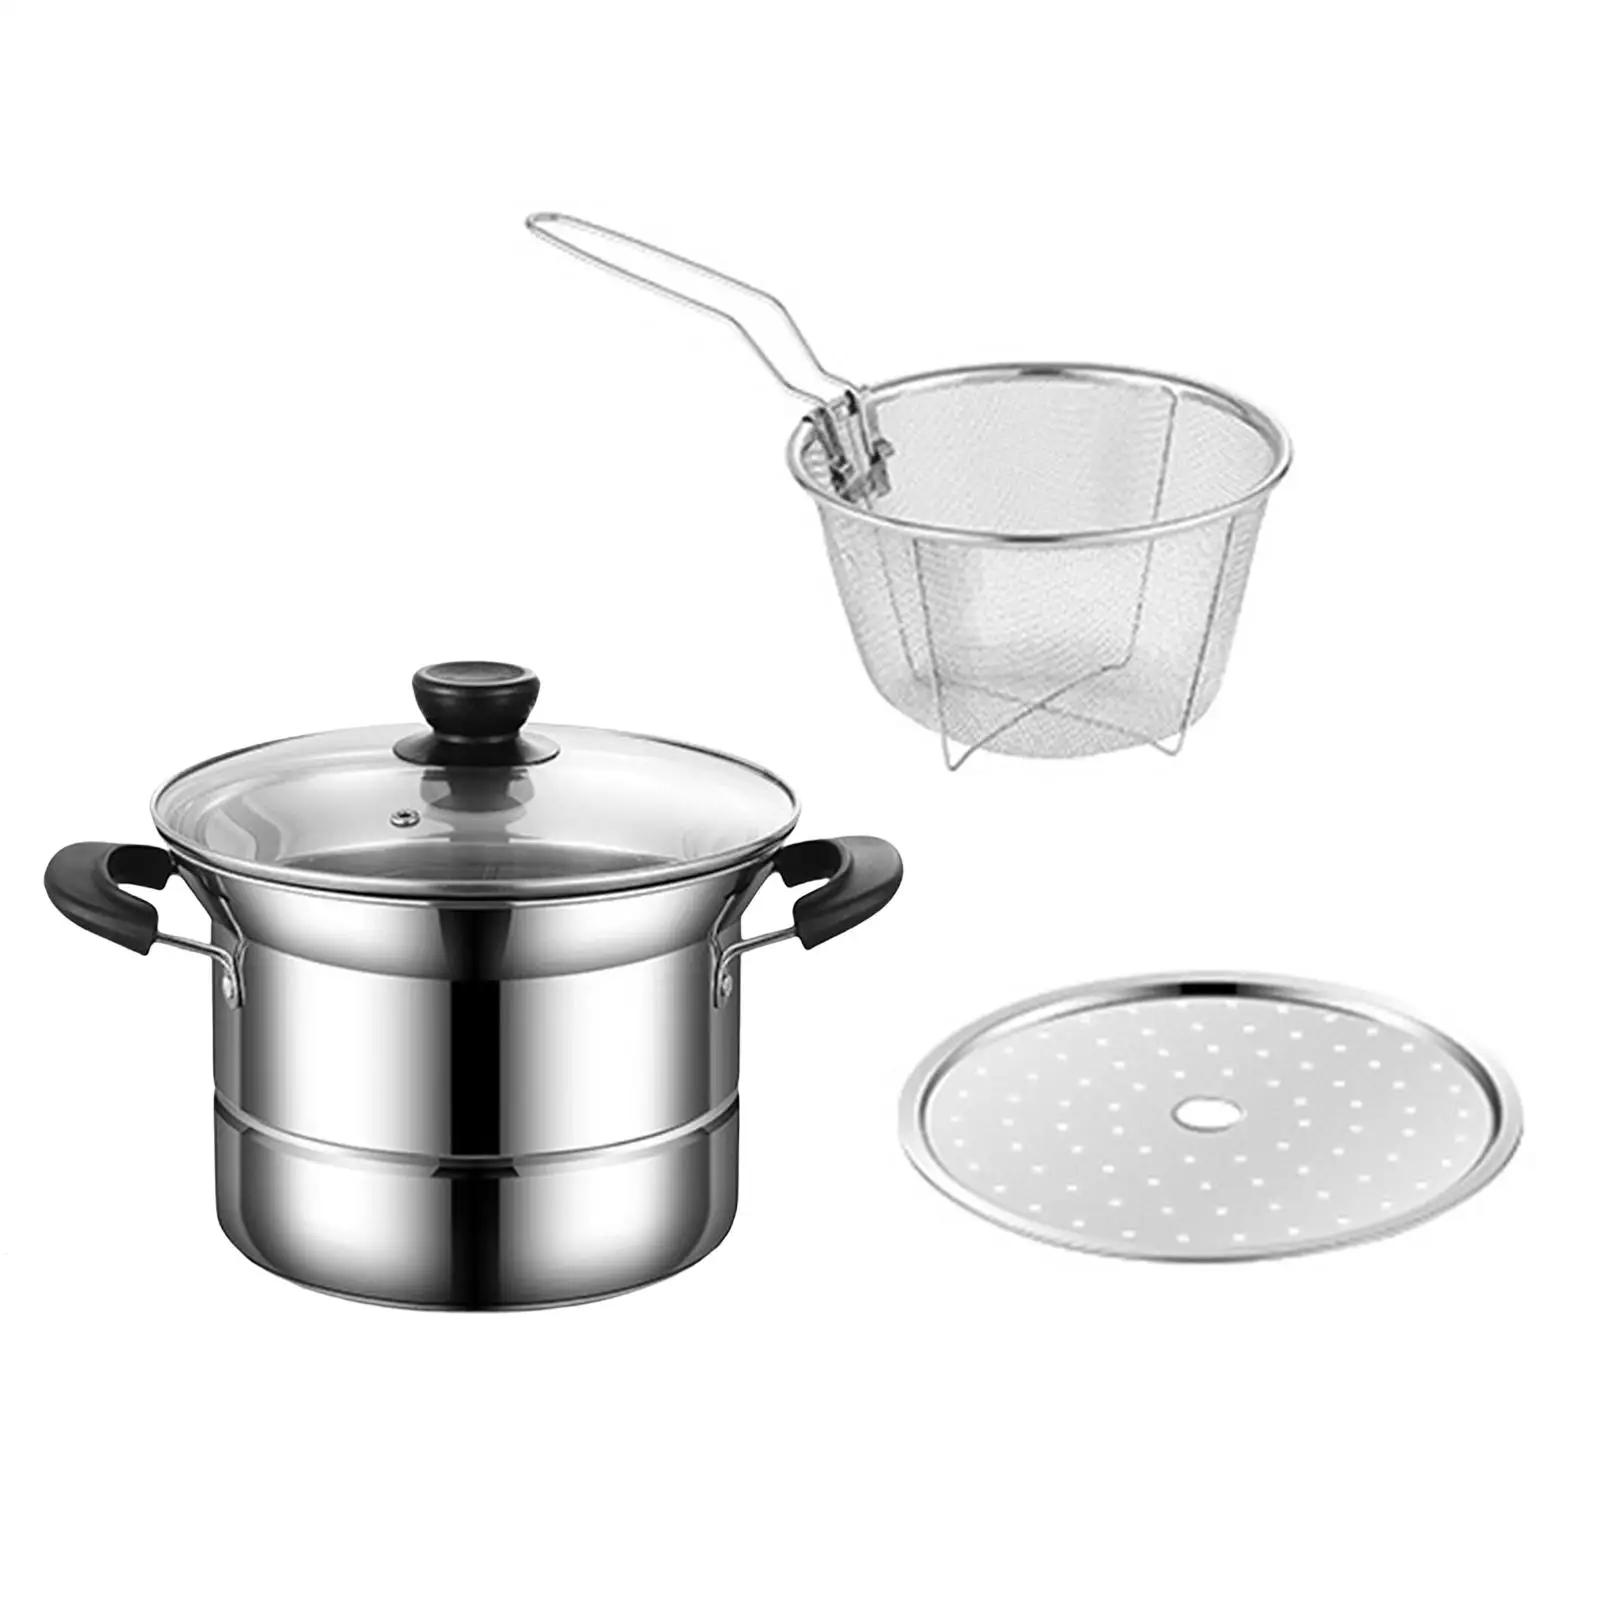 Small Pot with Lid Handle Cookware Sets for Restaurant Backpacking Cooking